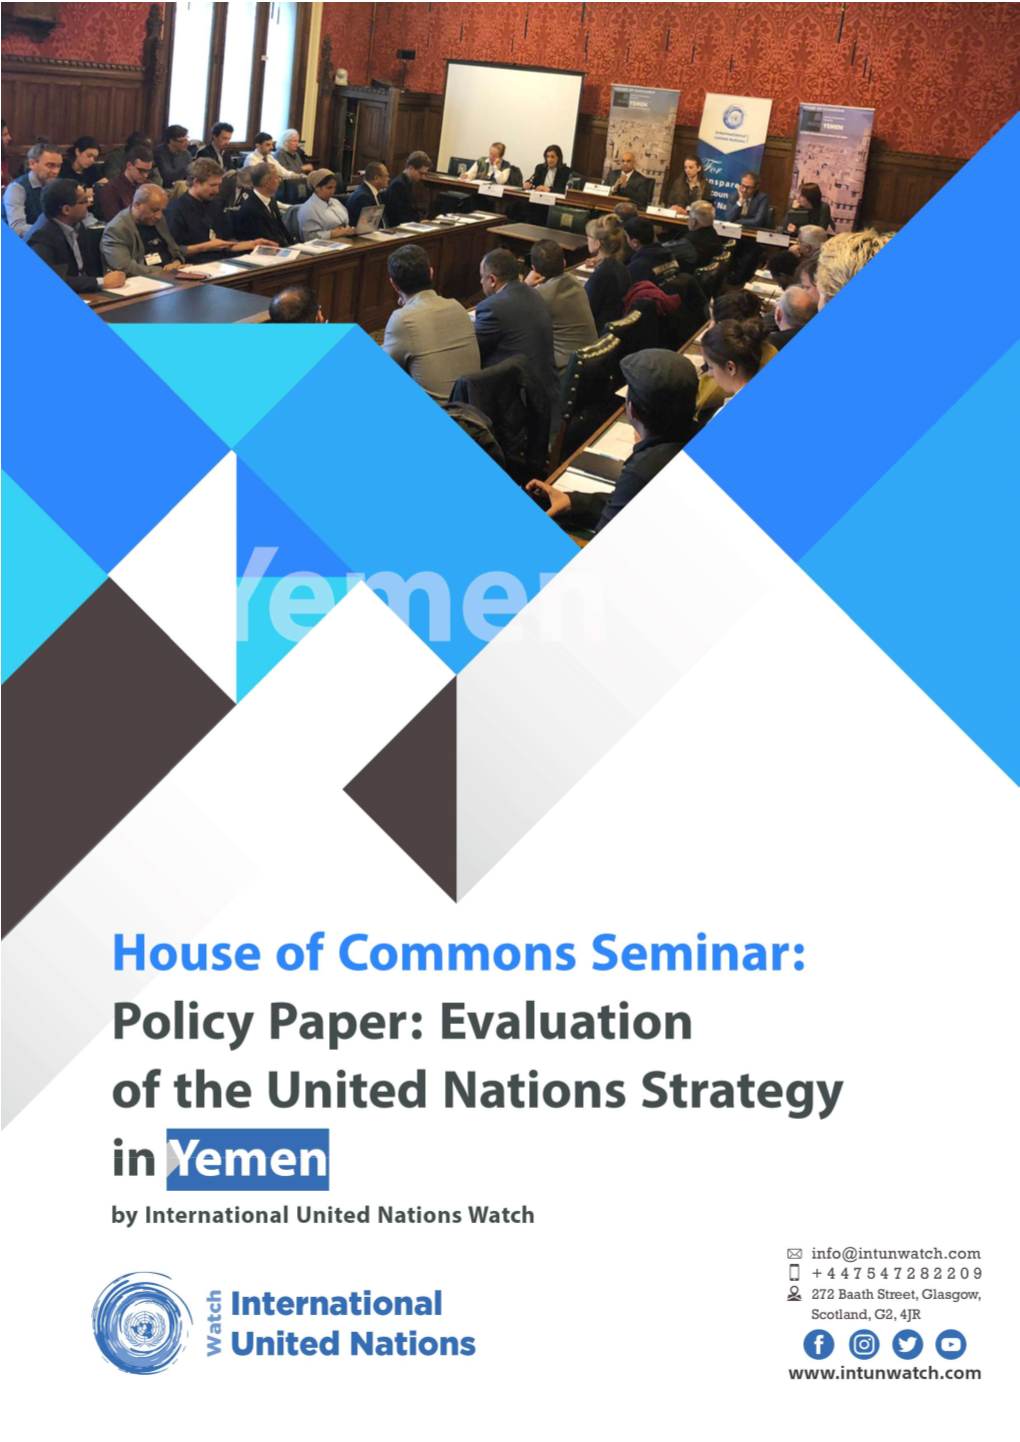 Policy Paper: Evaluation of the United Nations Strategy in Yemen